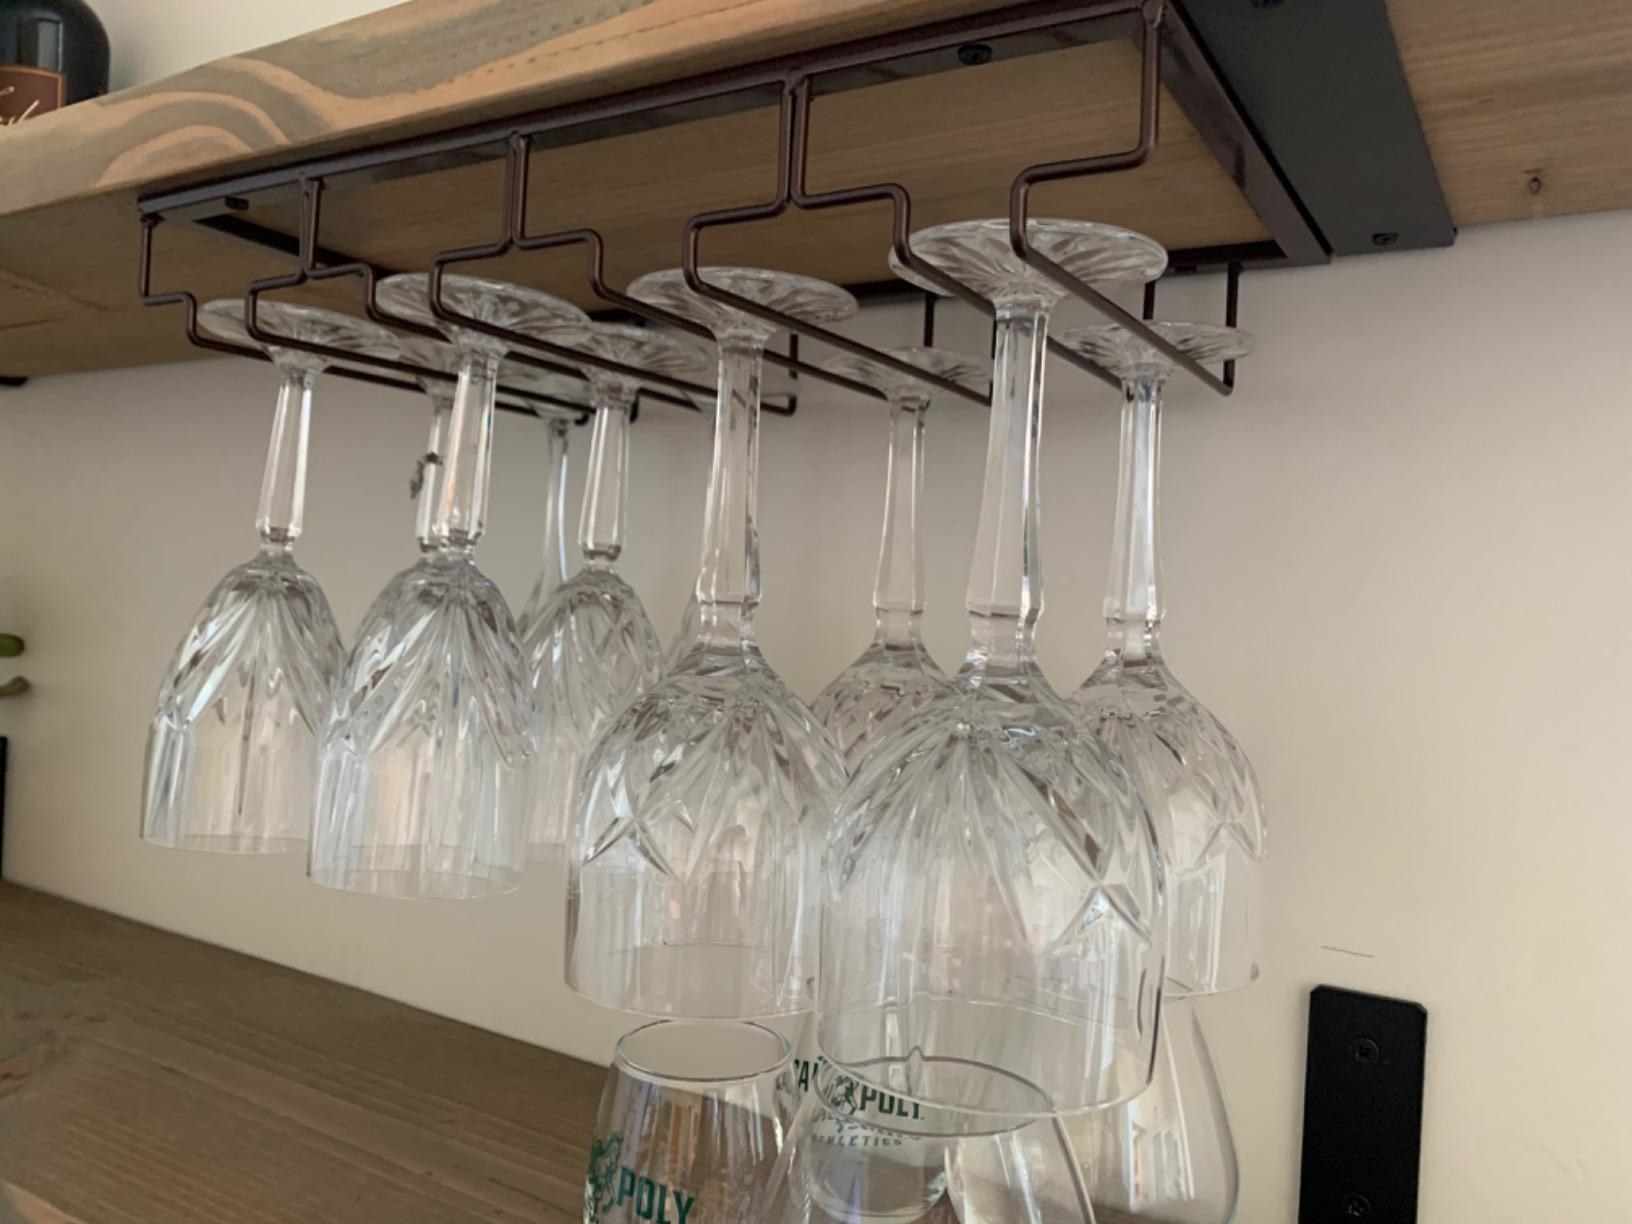 Metal wire frame holding upside wine glasses